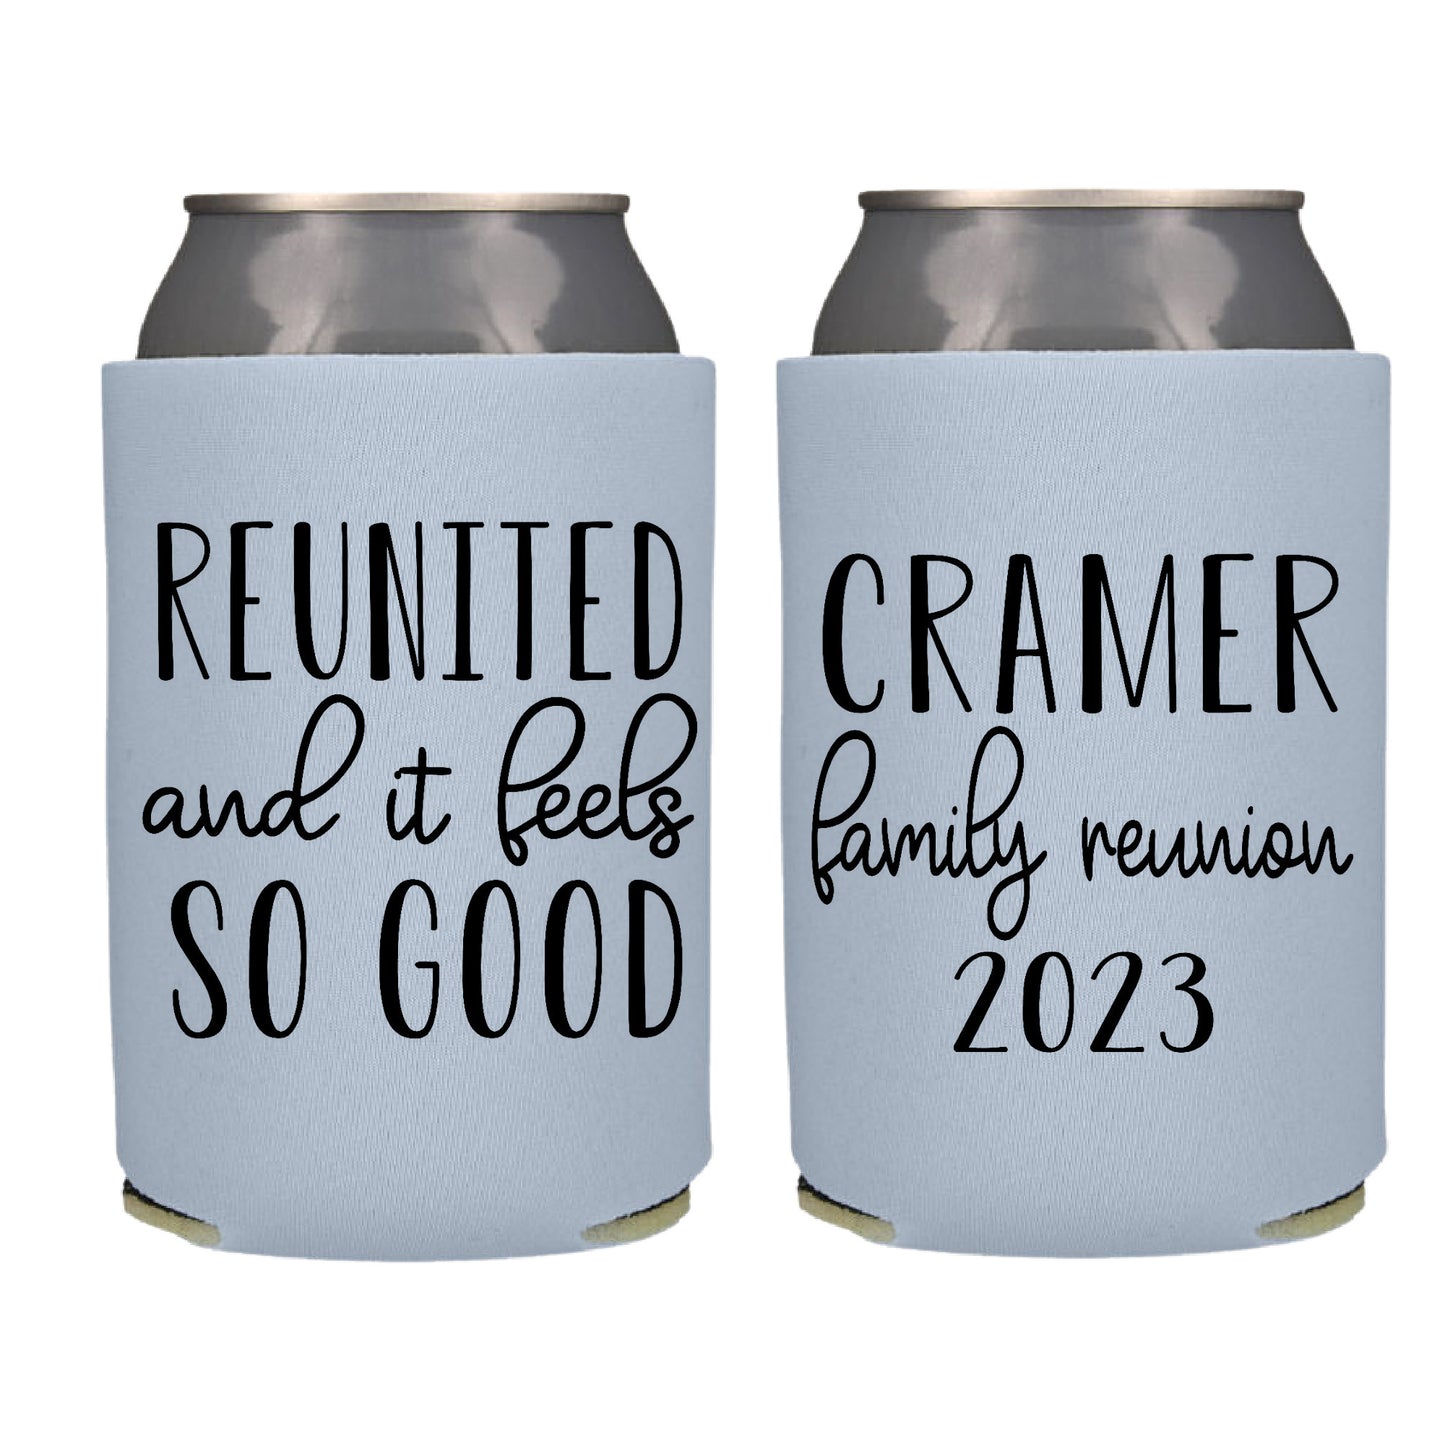 Reunited and it Feels so Good Family Reunion Screen Printed Can Cooler